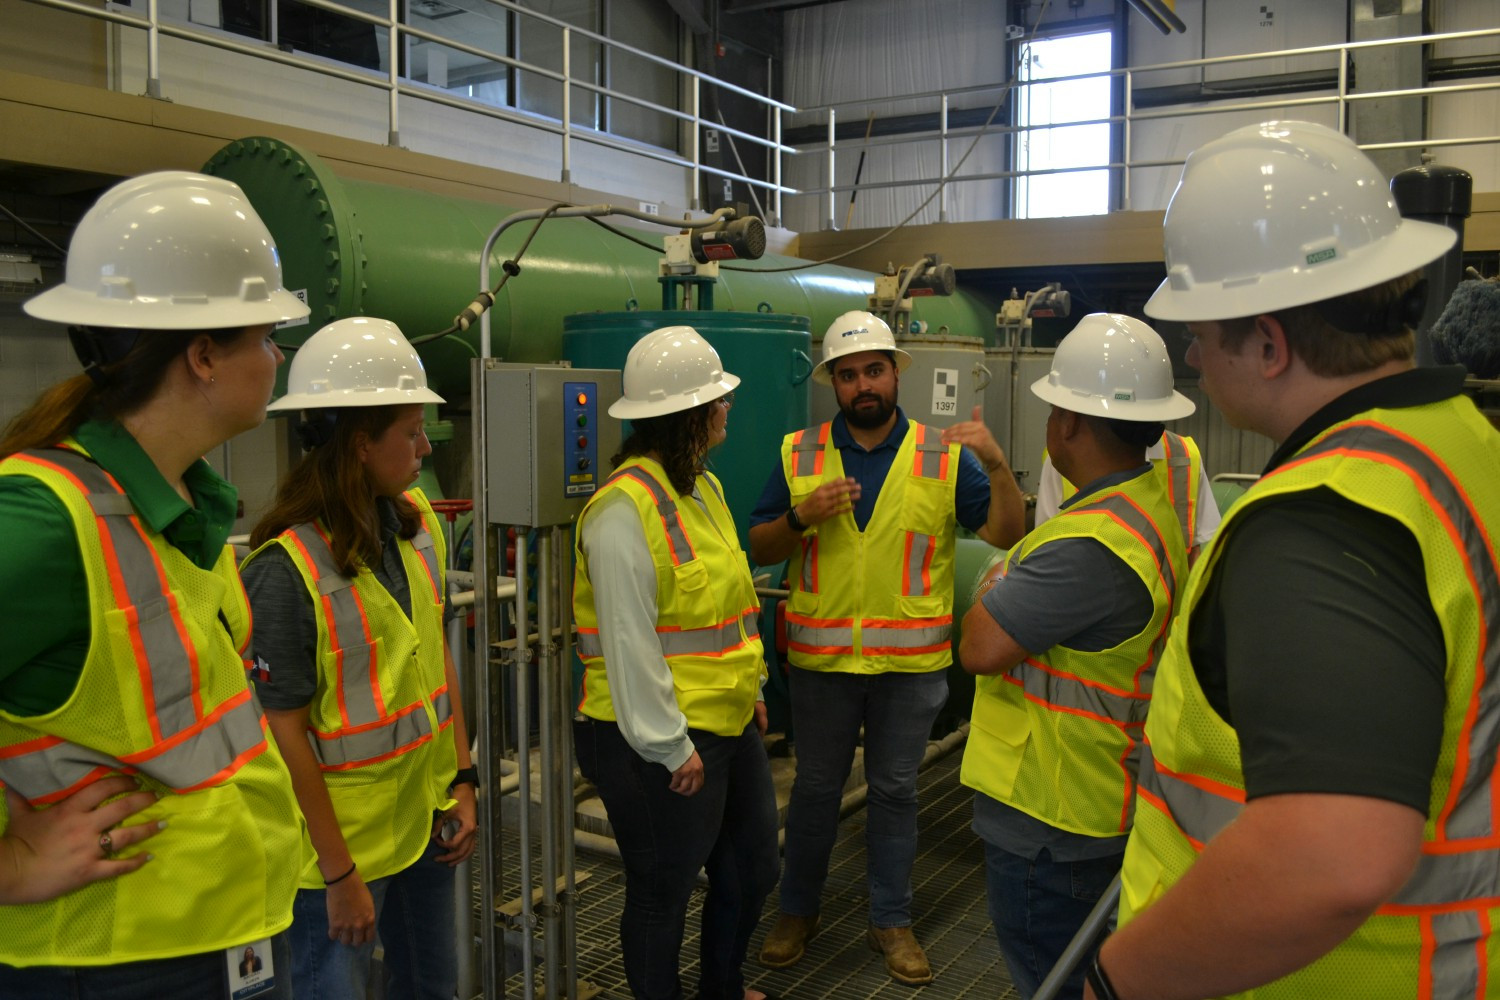 Project site visits, like this one to a water treatment plant, shows interns how their careers benefit the real world